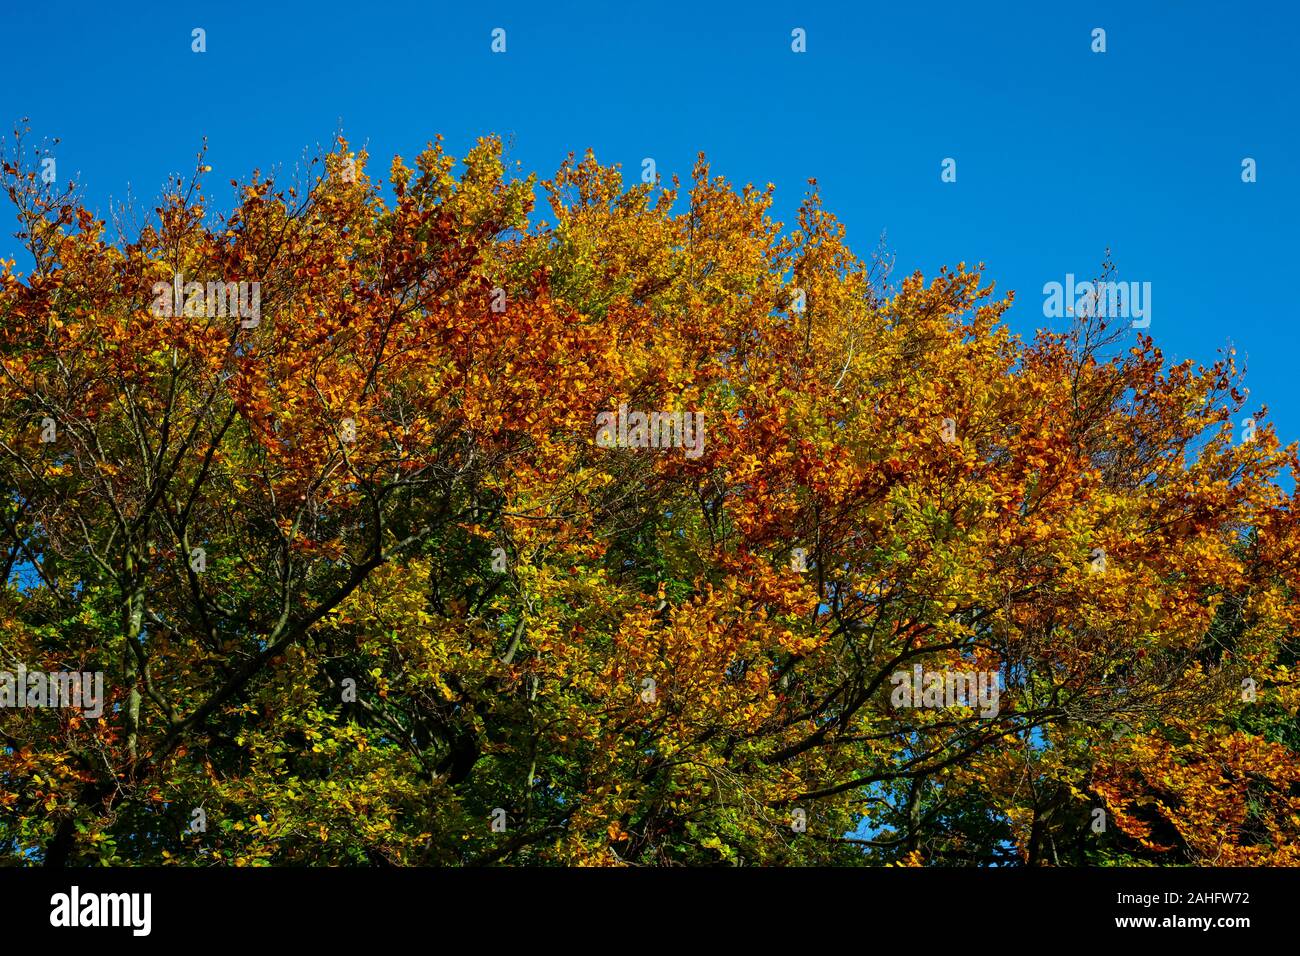 The crown of a tree with the green leaves turning a beautiful autumnal shade against a clear blue sky Stock Photo